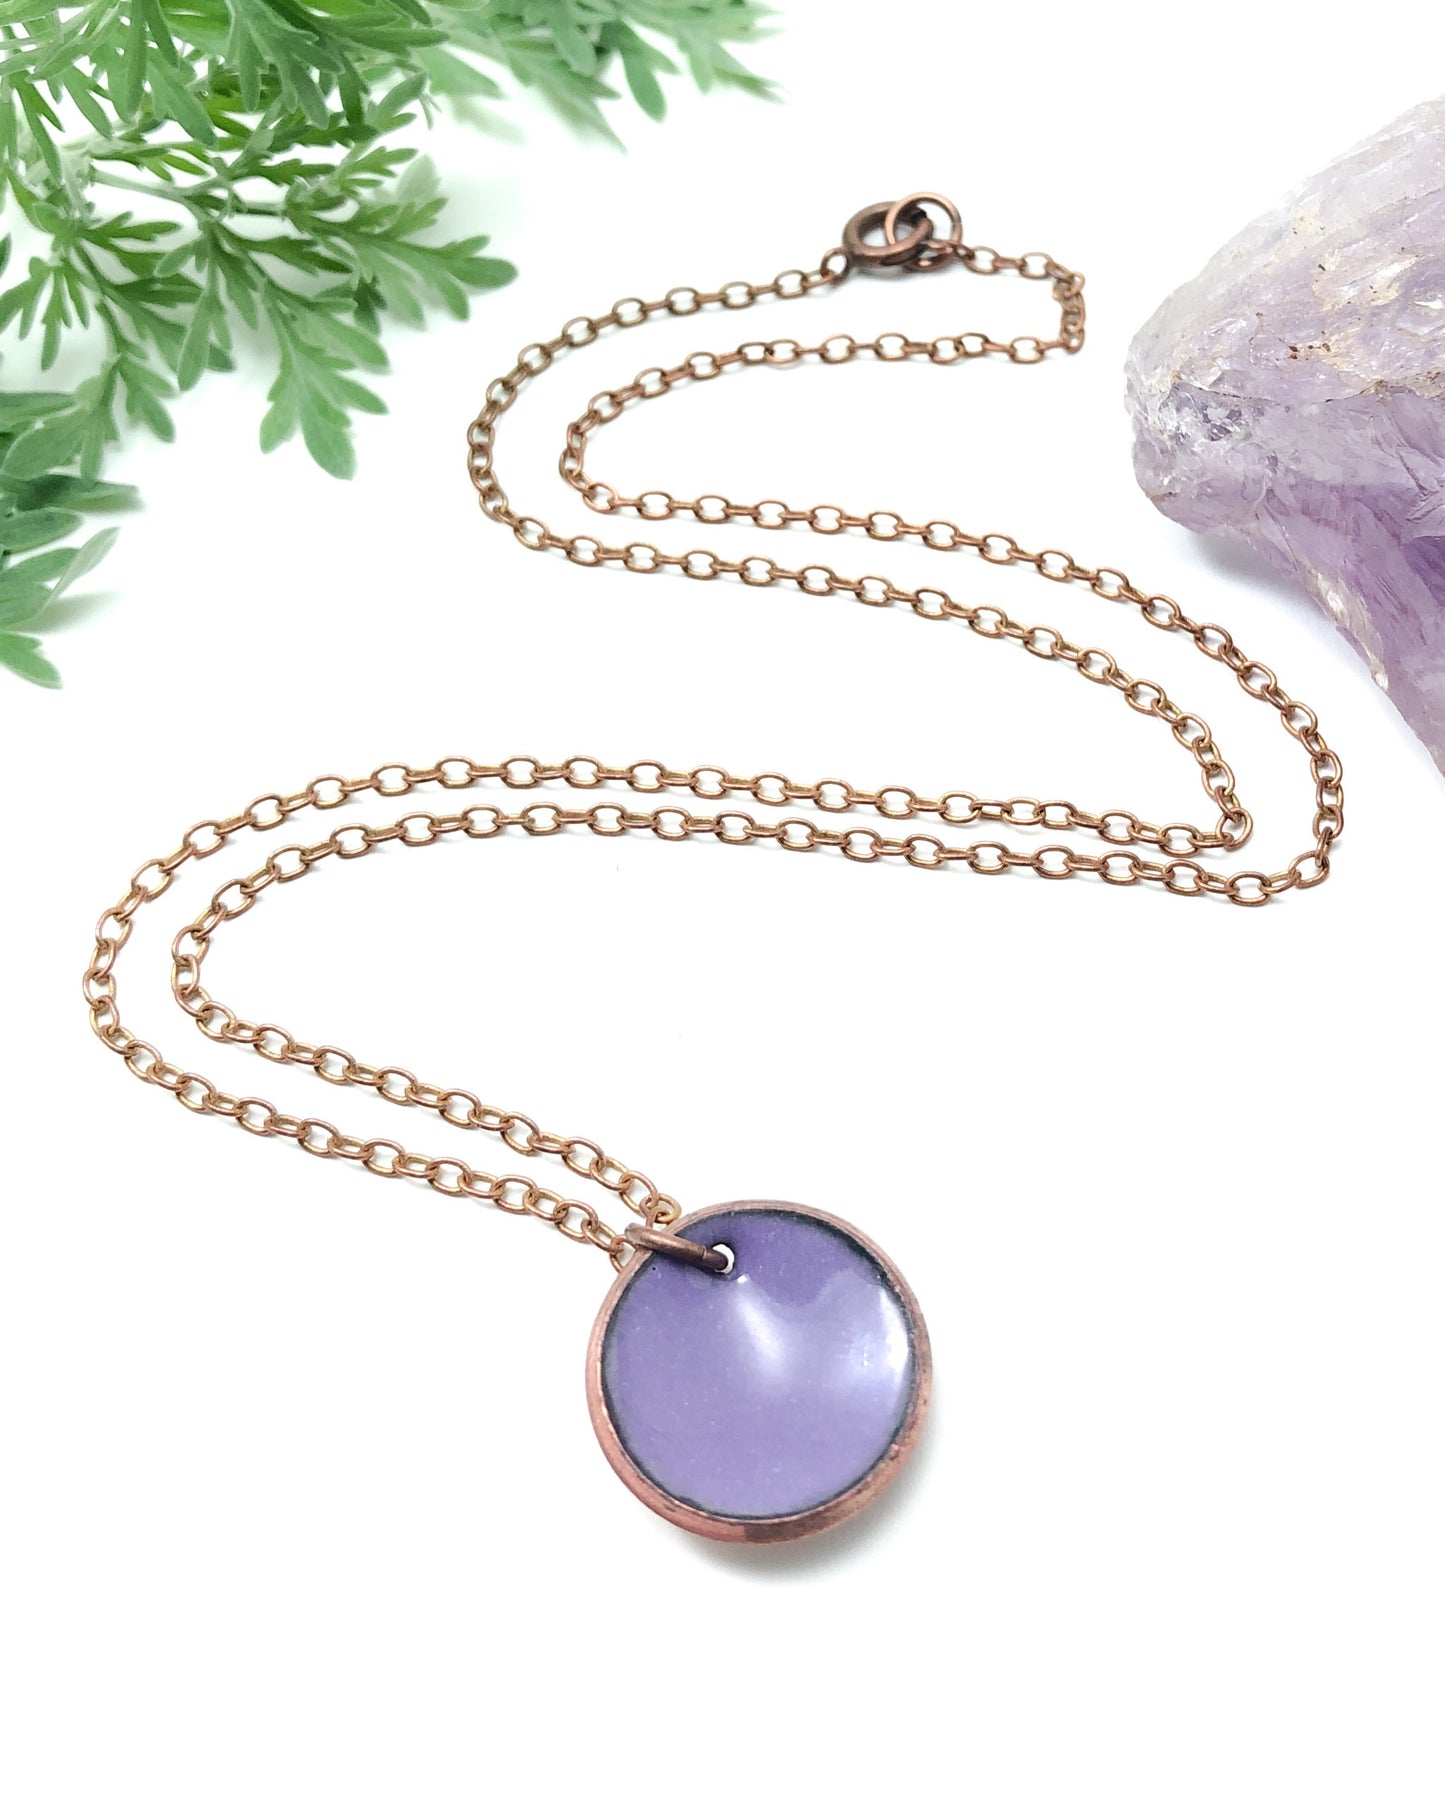 Wisteria Enameled penny pendant necklace [ready to ship]